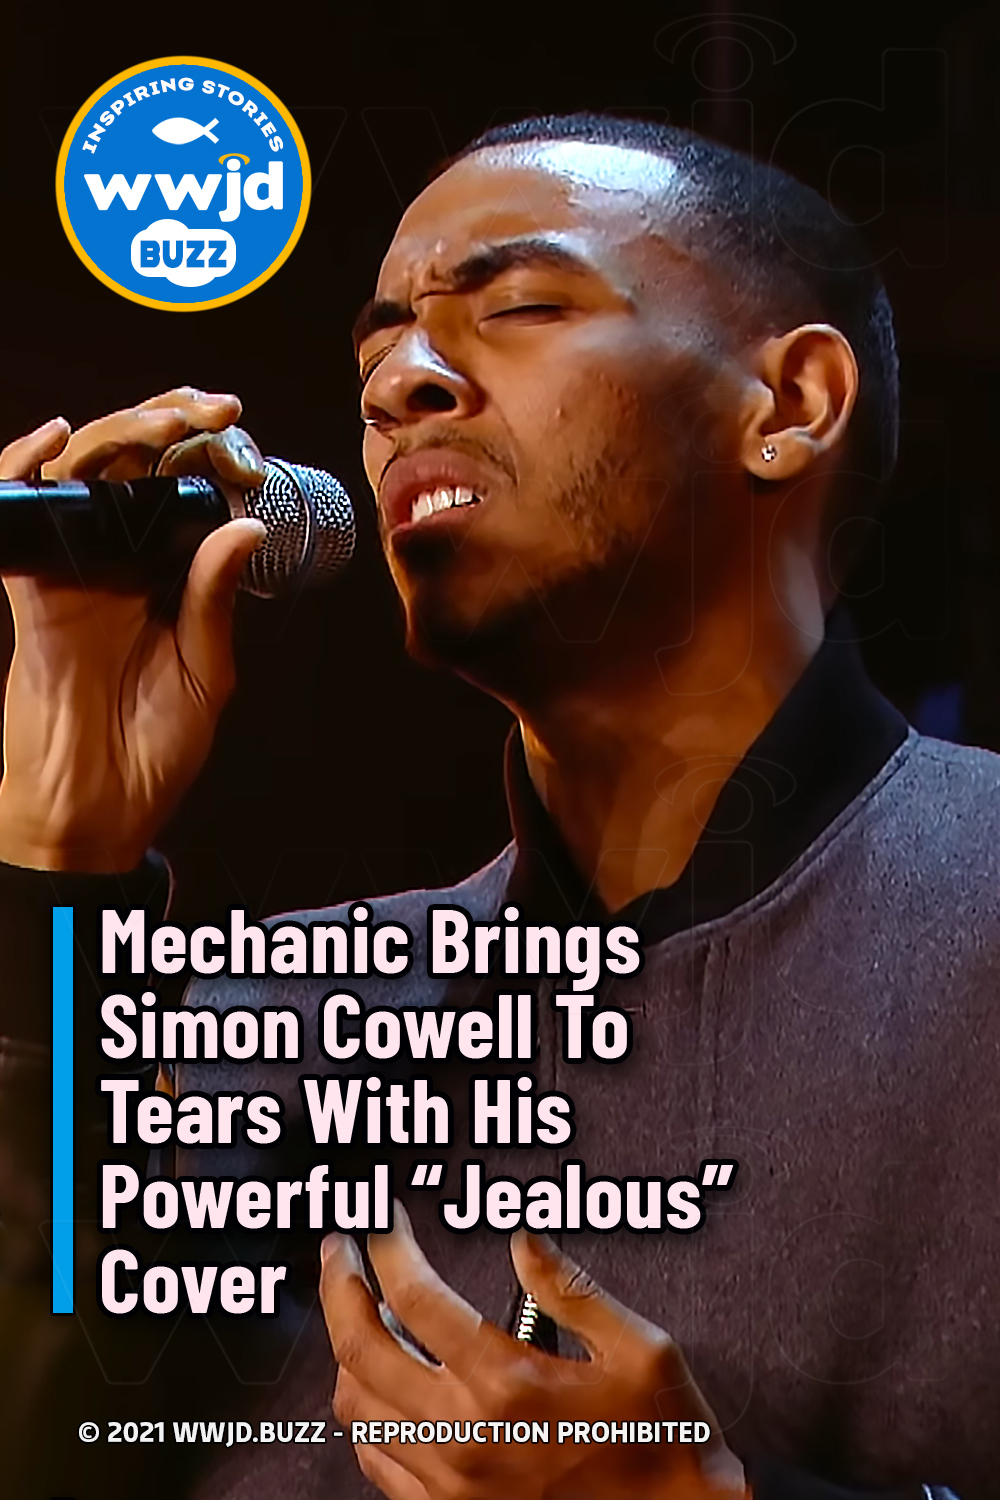 Mechanic Brings Simon Cowell To Tears With His Powerful “Jealous” Cover